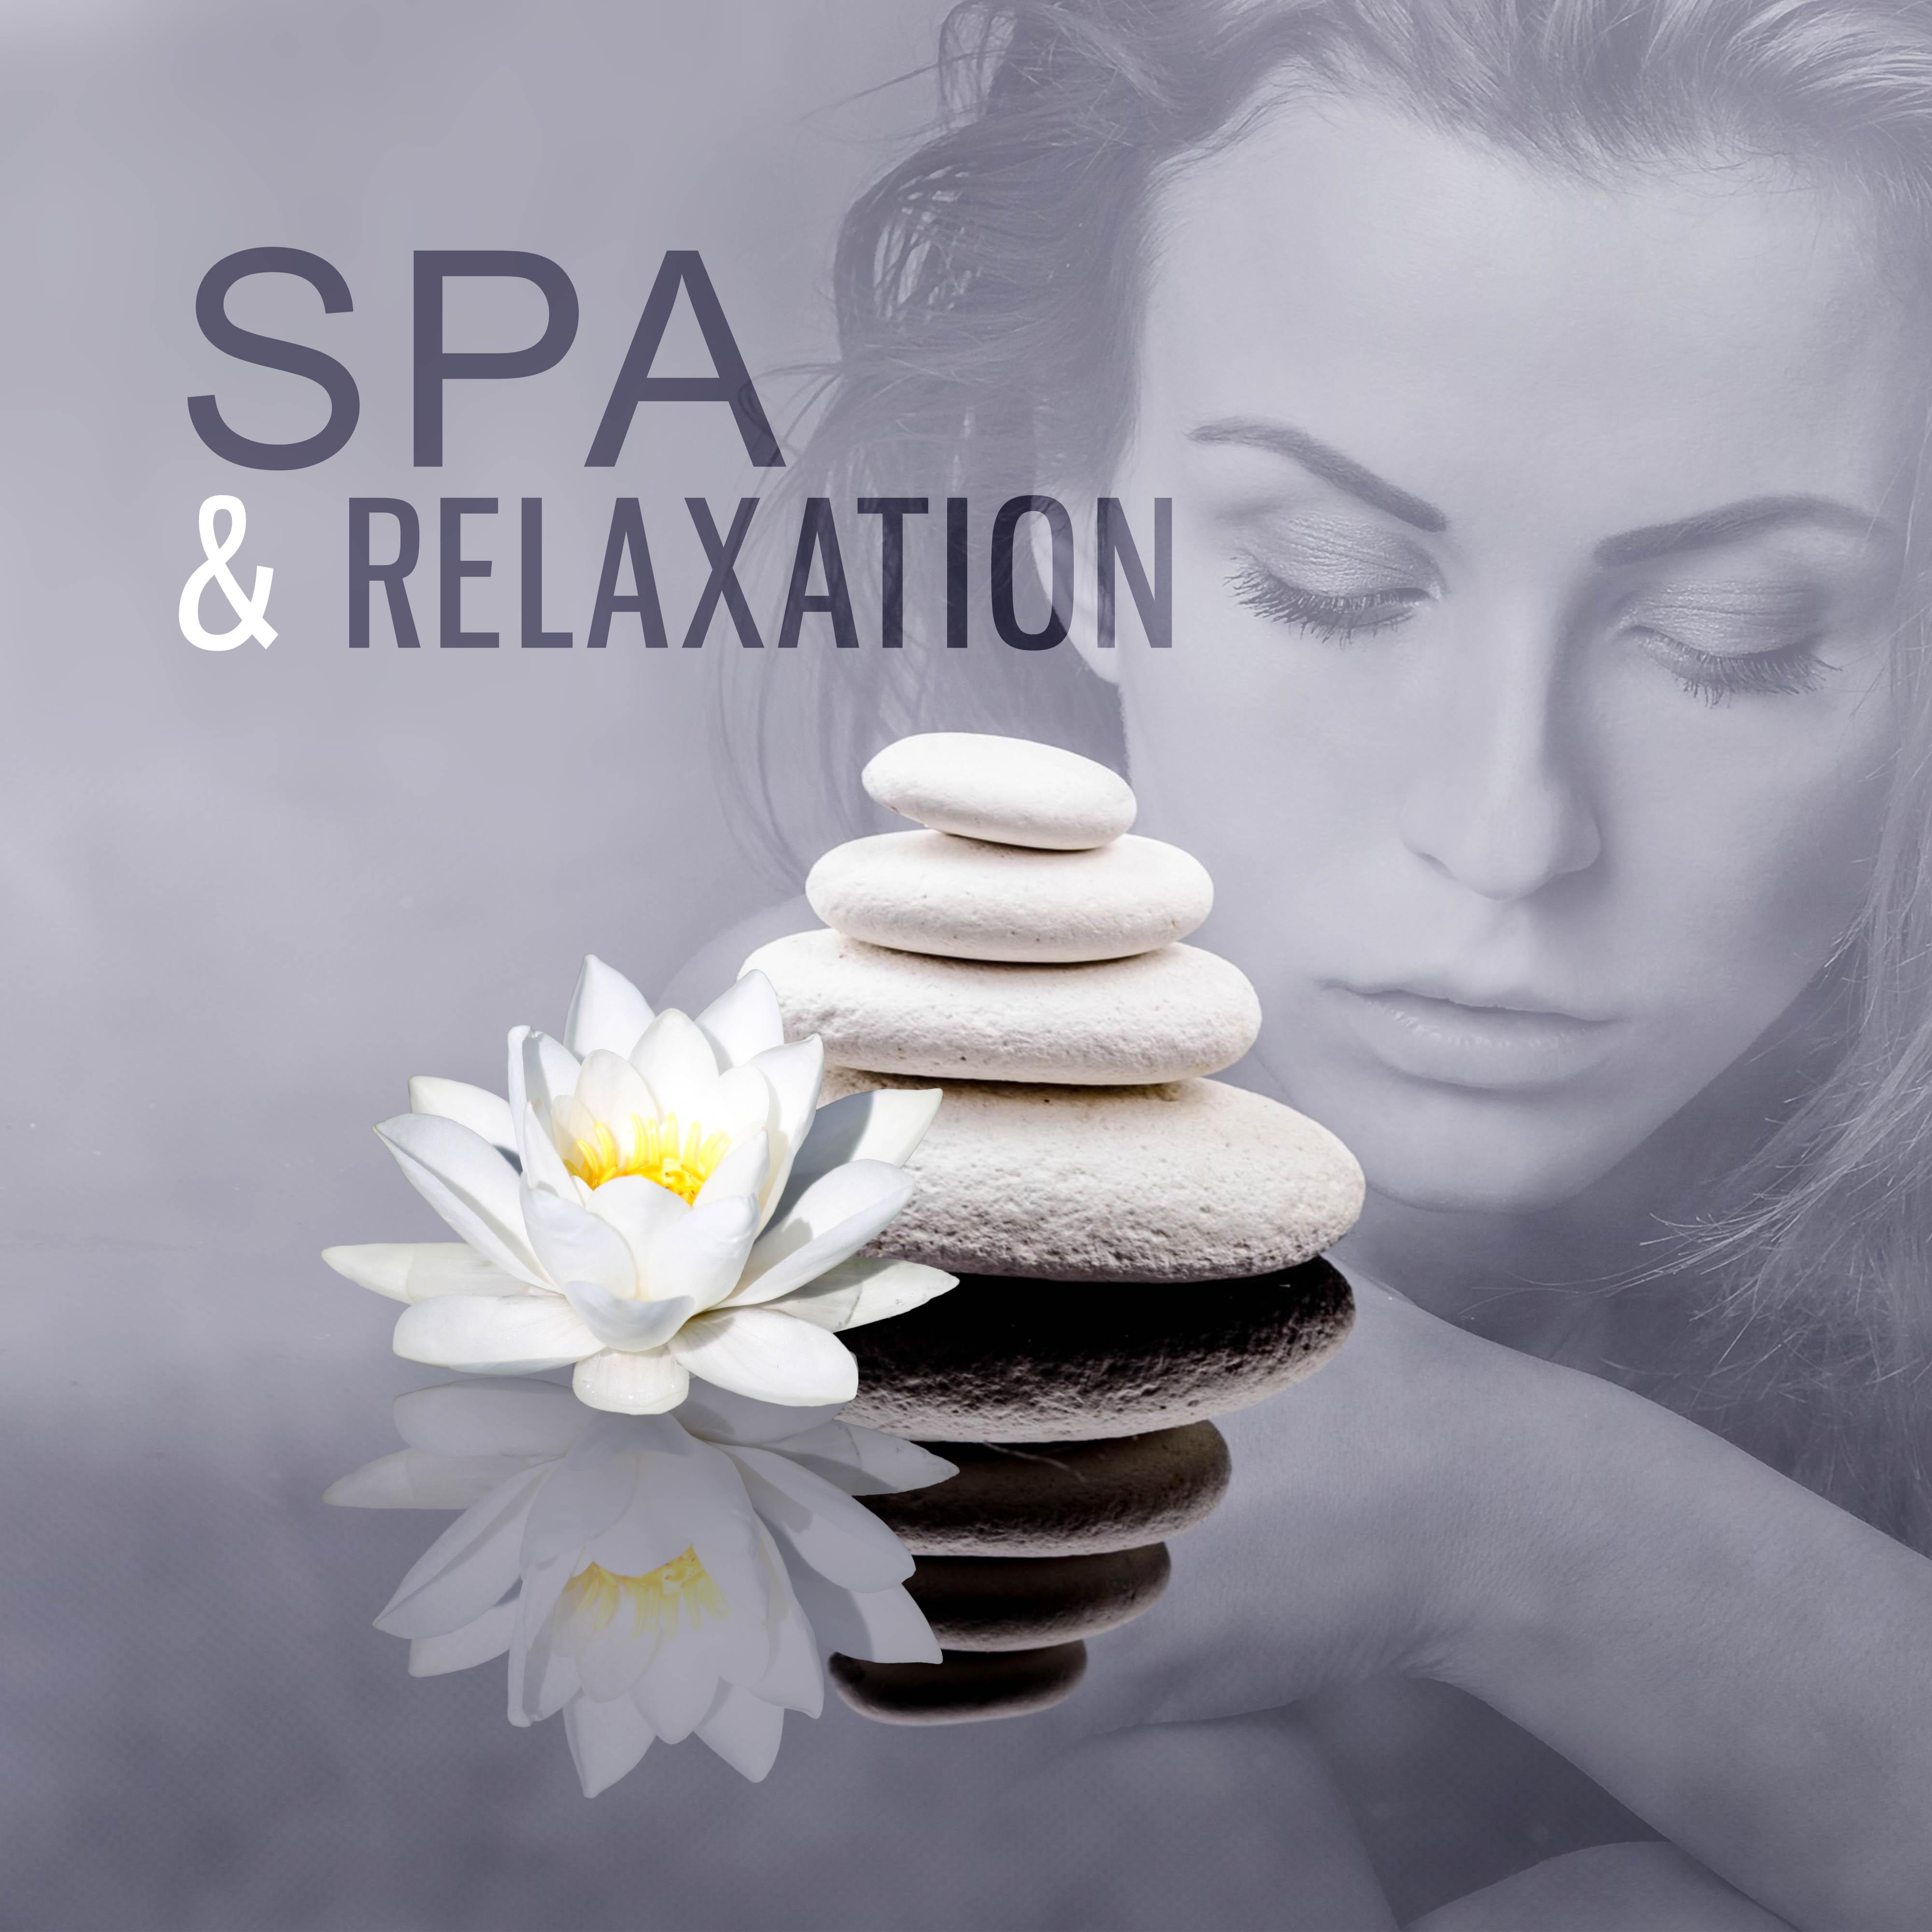 Spa & Relaxation – Healing Spa Sounds